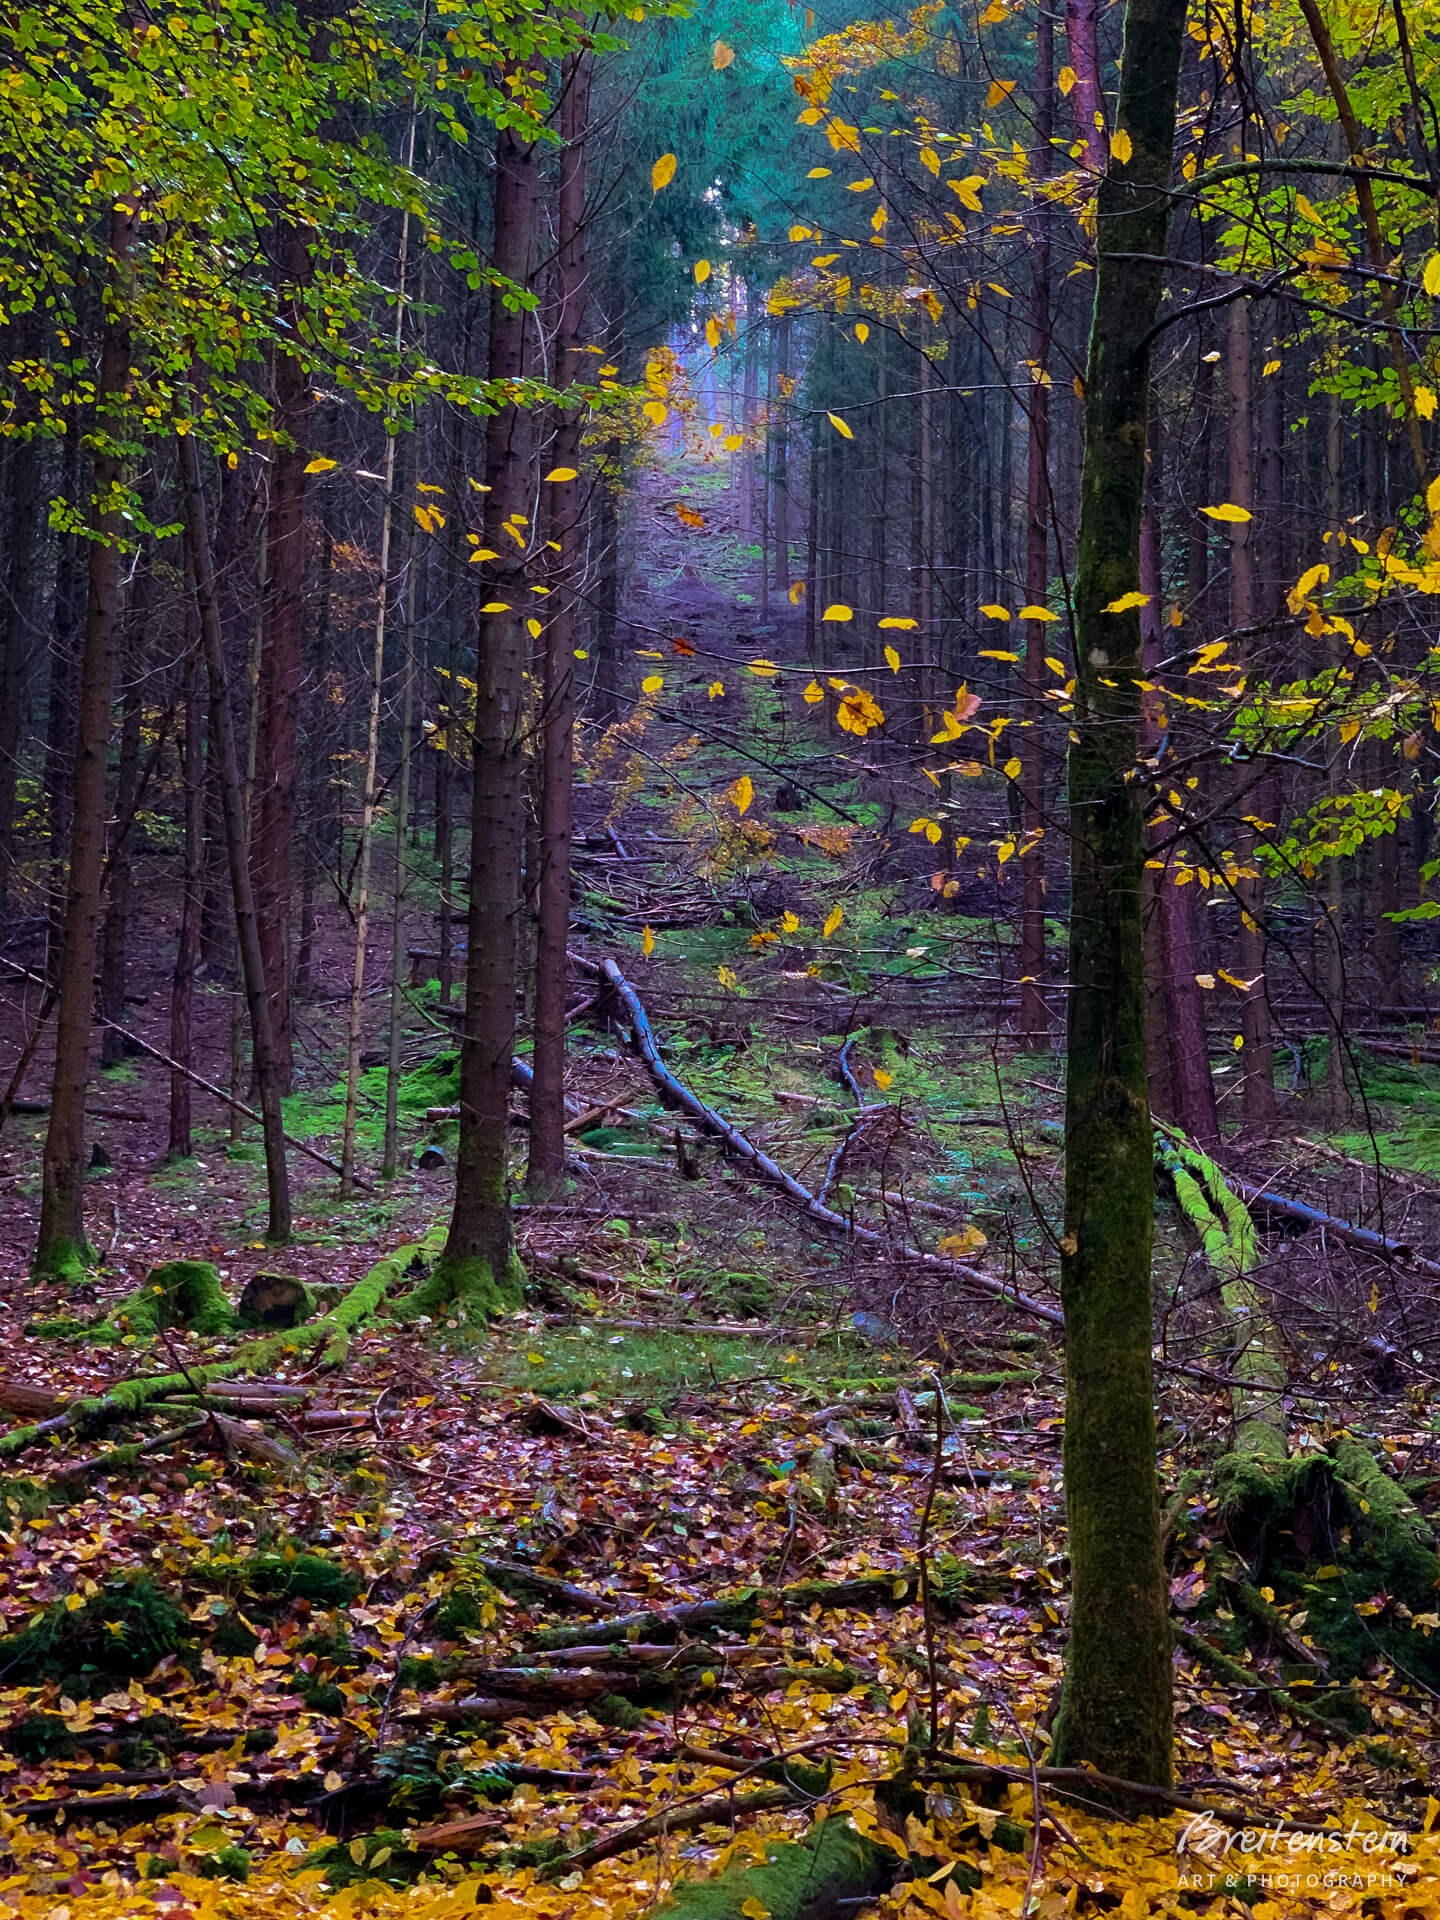 Photograph of a wooded hillside in a "fairytale" forest. The image is quite colorful and dreamy, with autumn leaves, a violet-tint to the trees, and a hazy view in the distance.